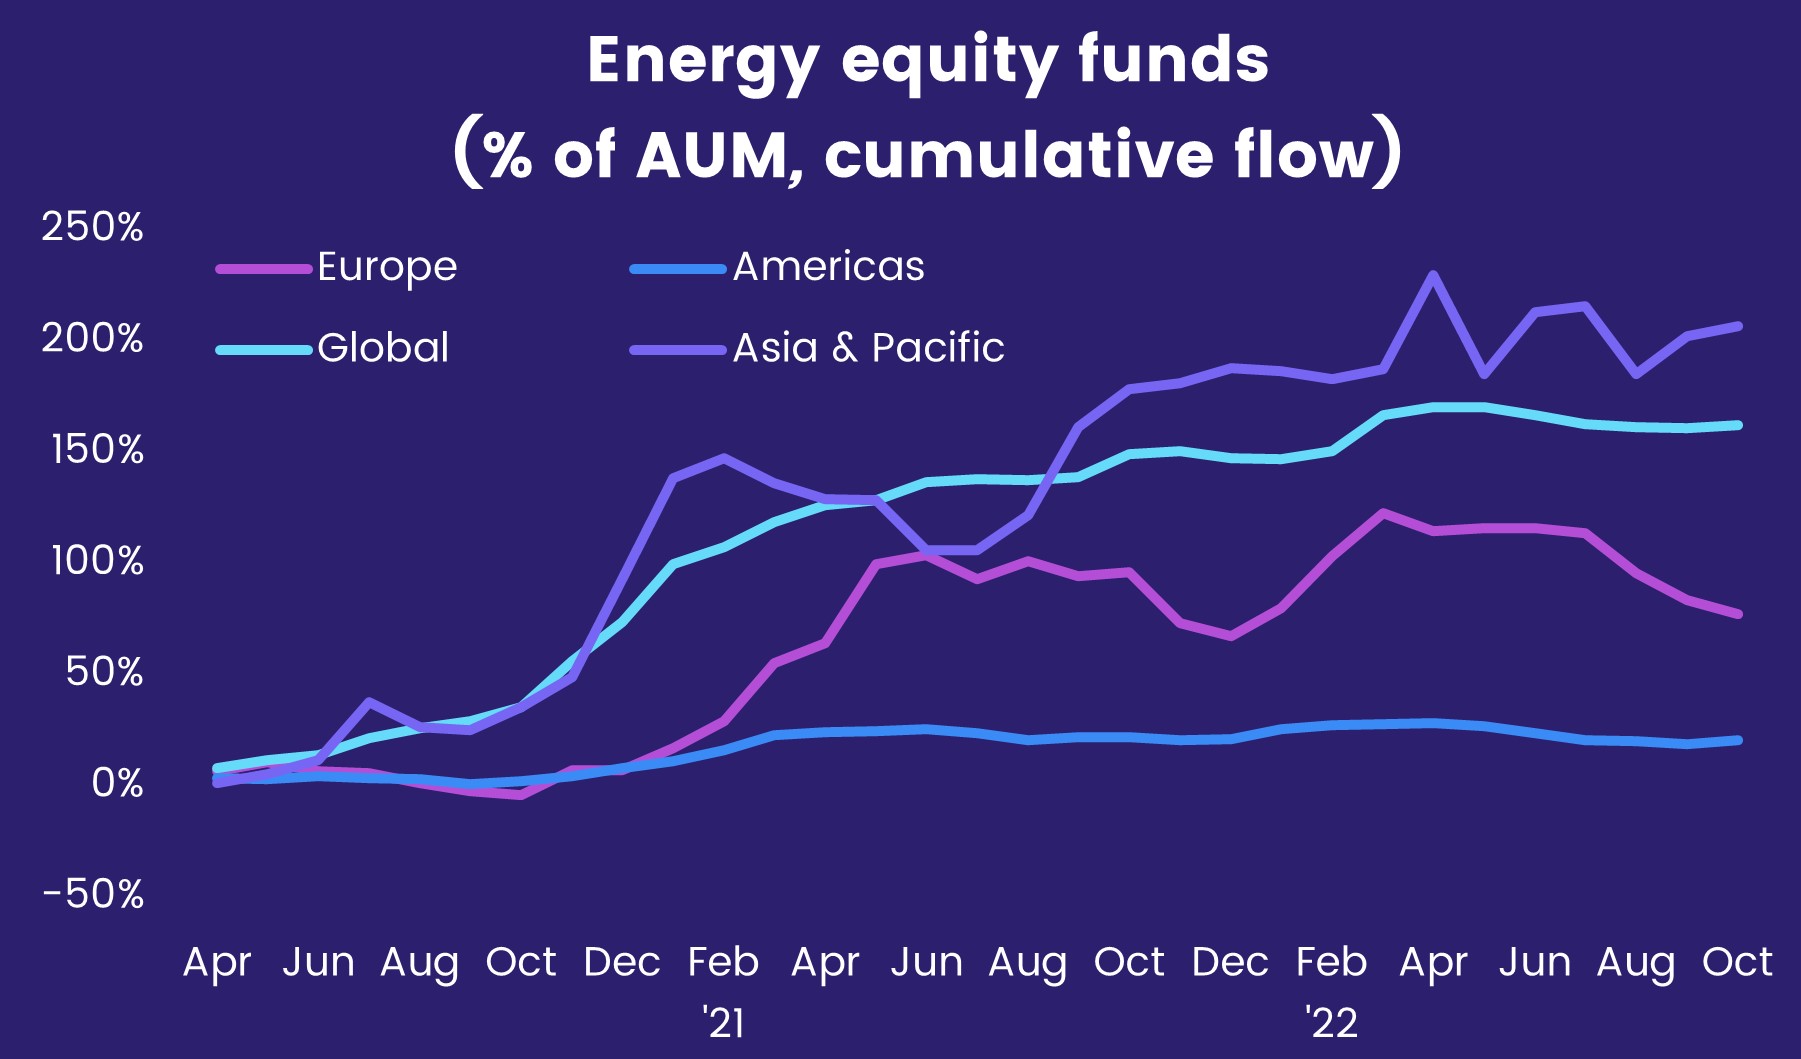 Image of a chart representing the "Cumulative energy equity fund flows, as percentage of AUM, for Europe, Americas, APAC and Global, from April 2021 to October 2022".